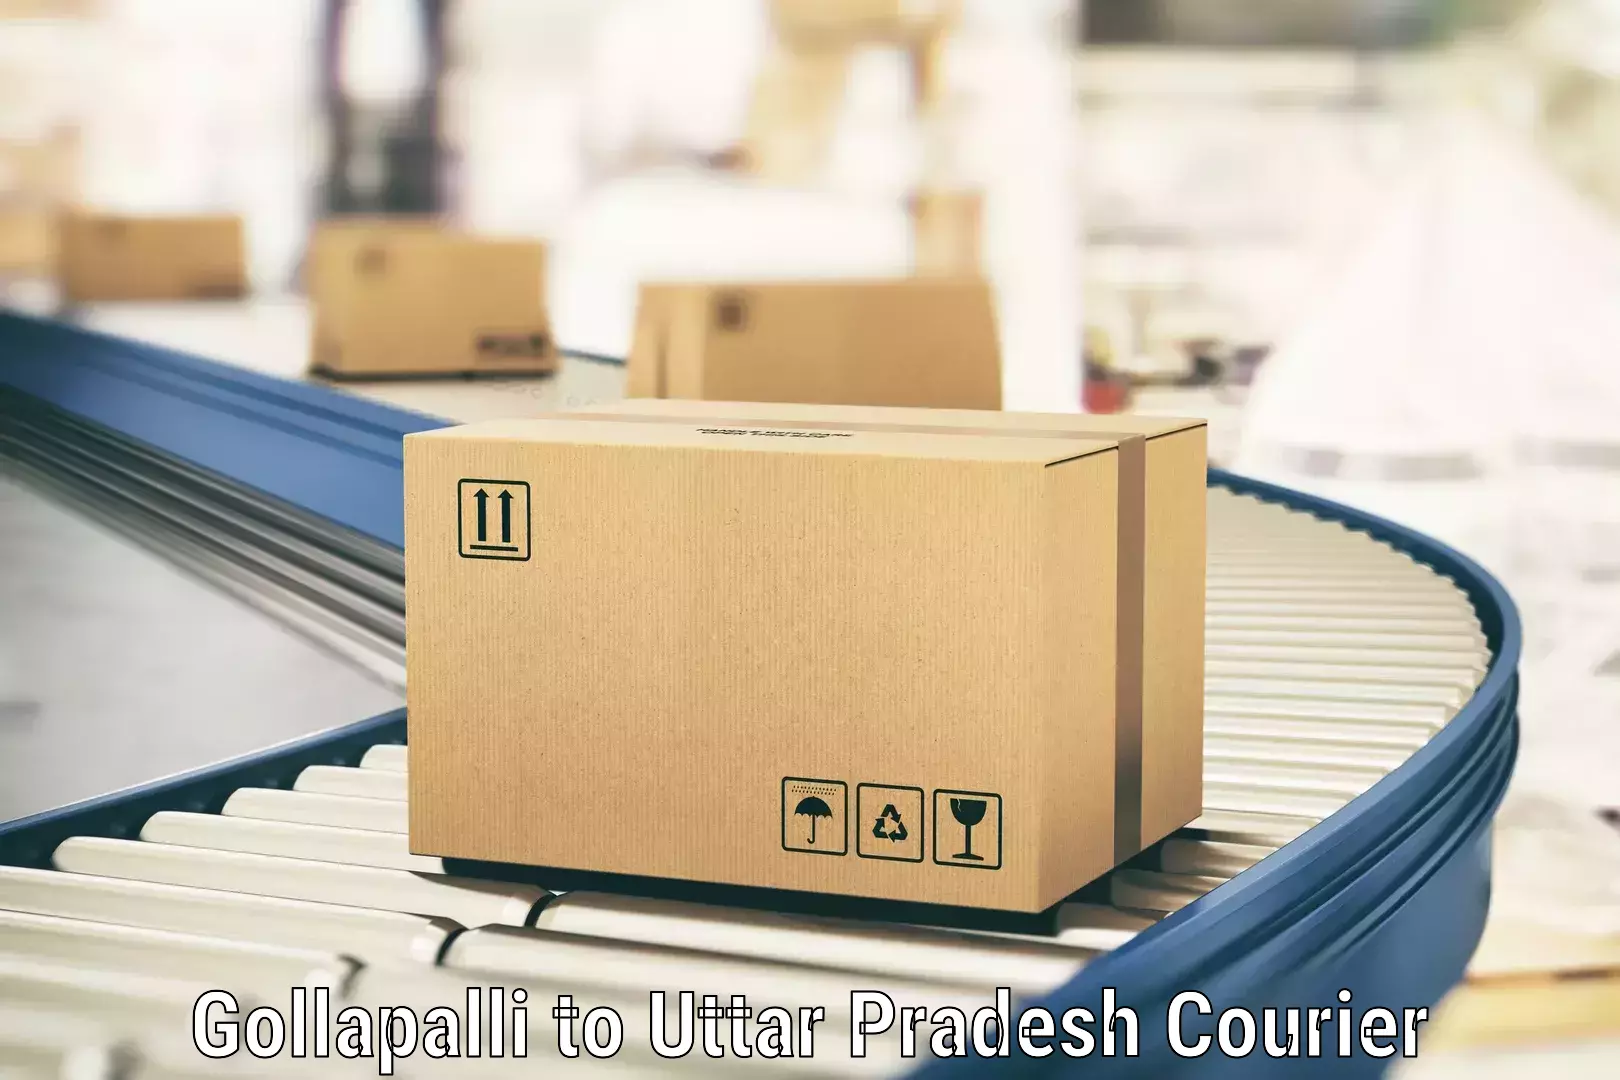 Ground shipping Gollapalli to Allahabad